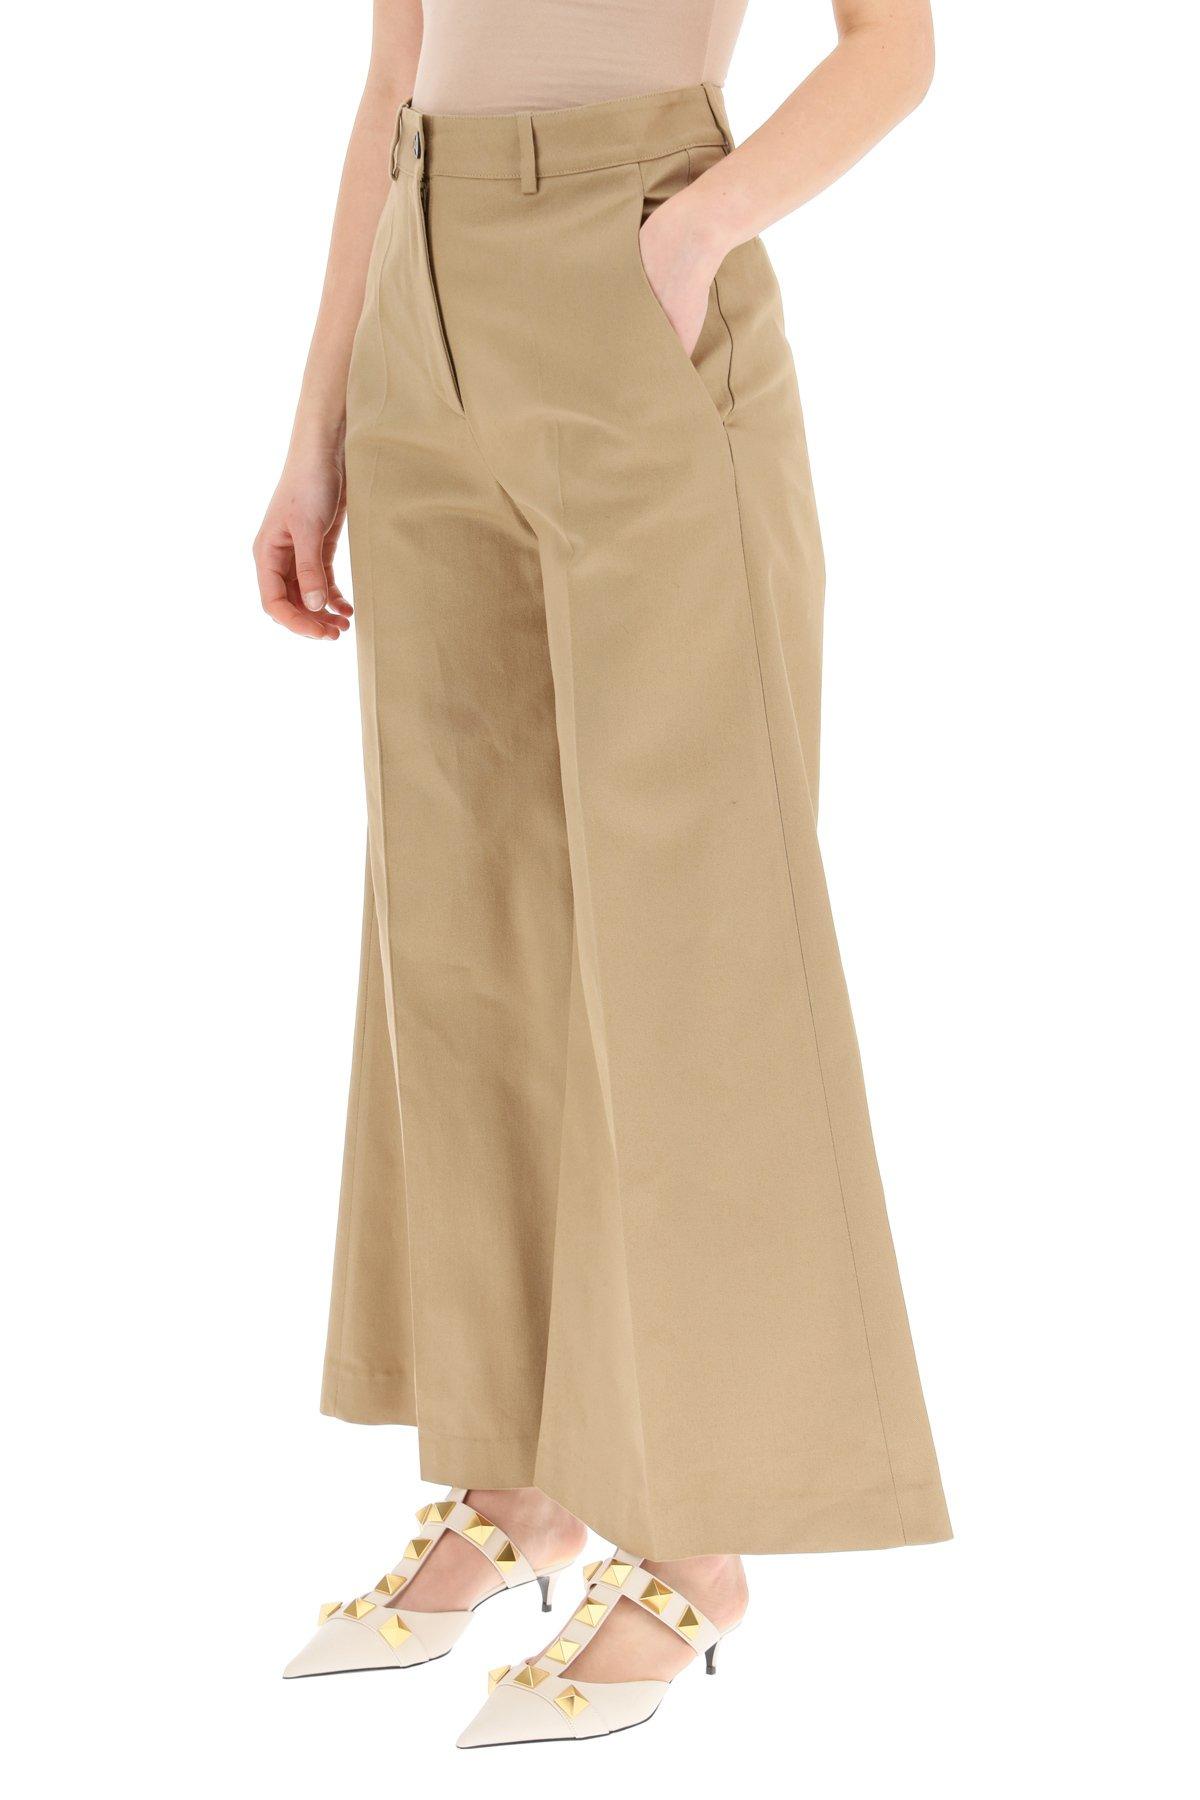 Valentino Cotton Culotte Trousers in Beige,Brown (Natural) | Lyst 